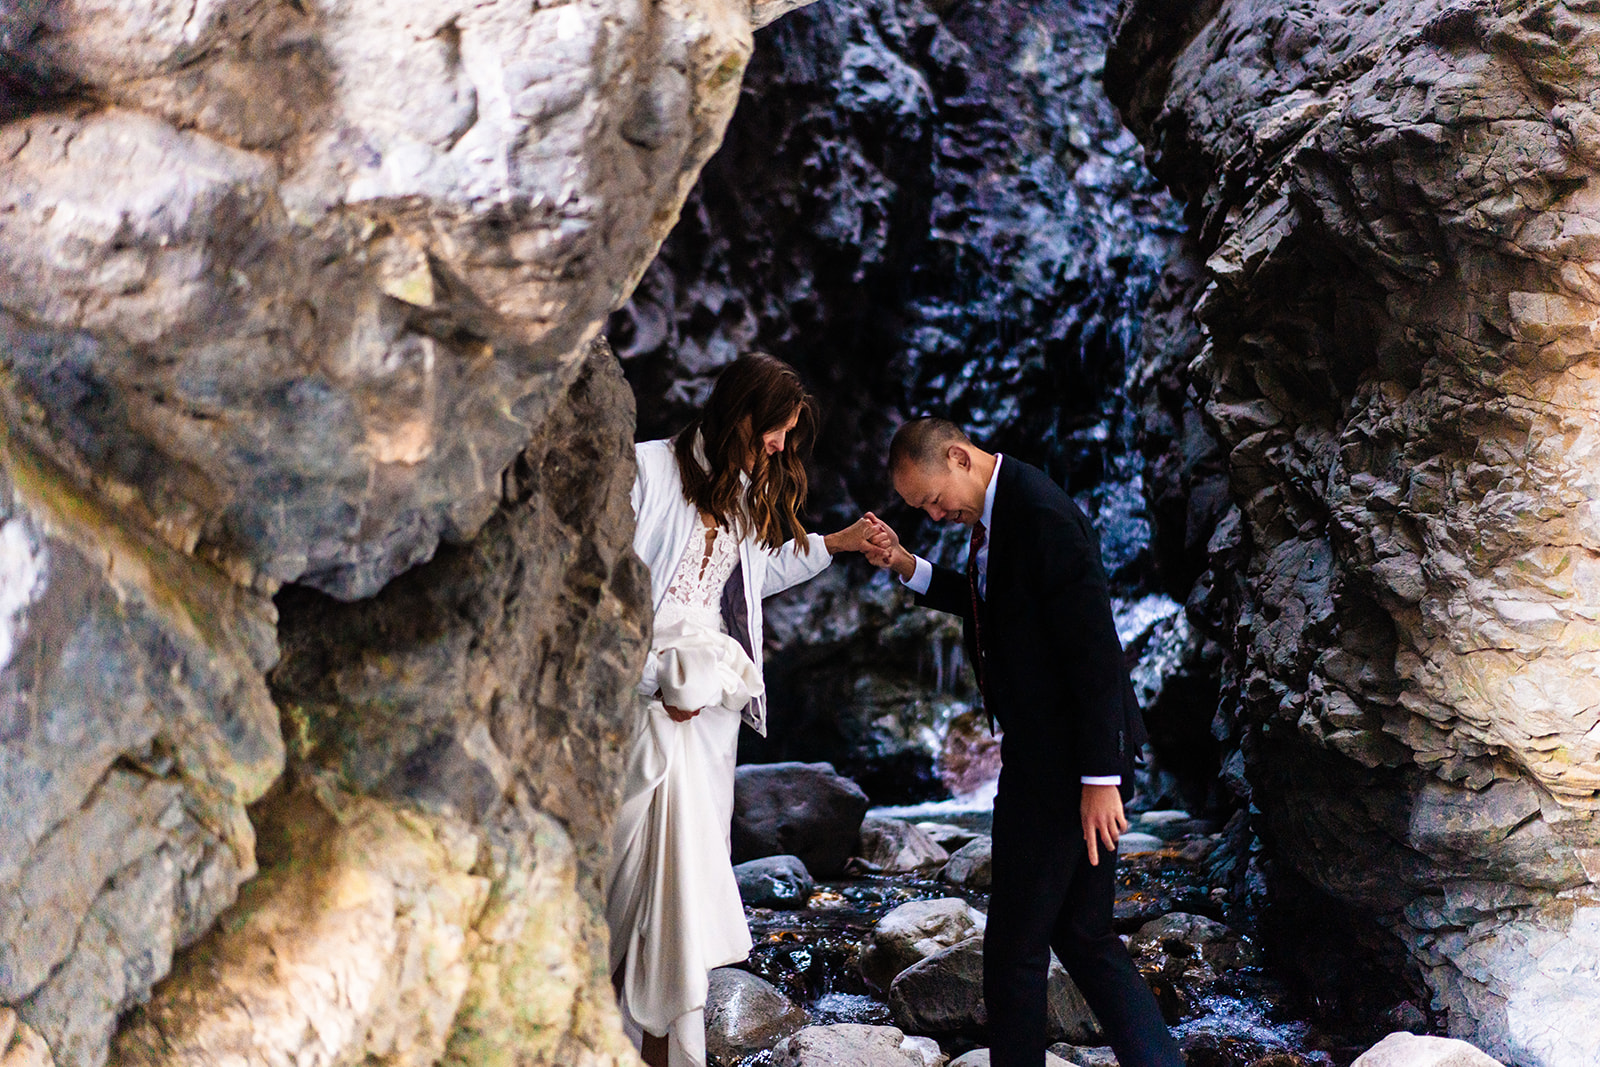 A bride and groom standing next to a stream in a canyon.